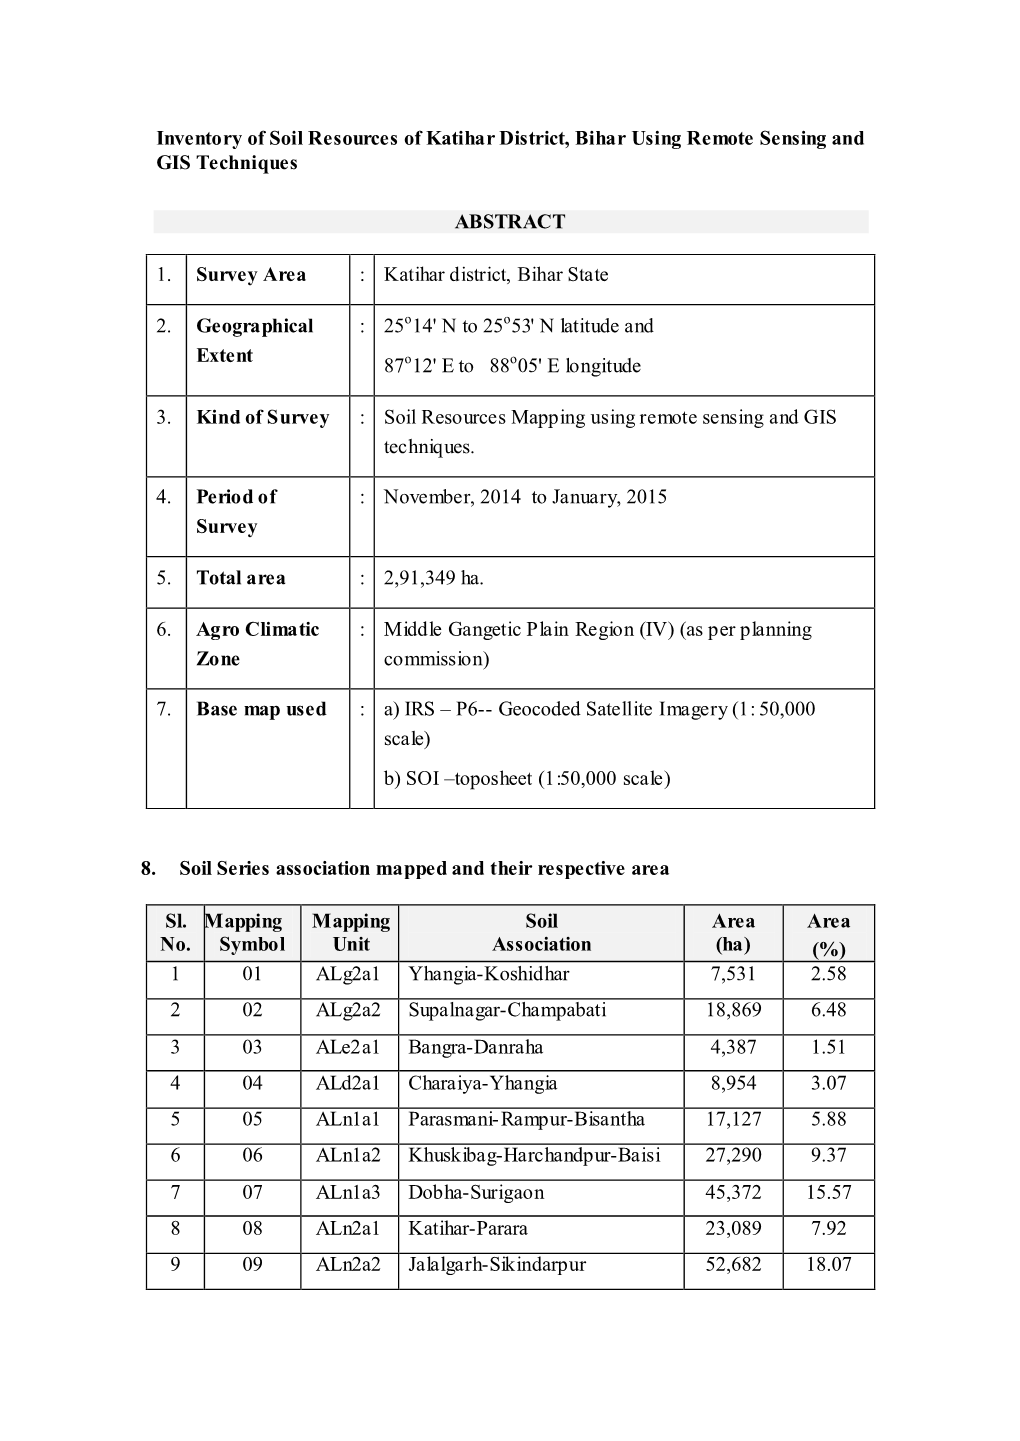 Inventory of Soil Resources of Katihar District, Bihar Using Remote Sensing and GIS Techniques ABSTRACT 8. Soil Series Associati